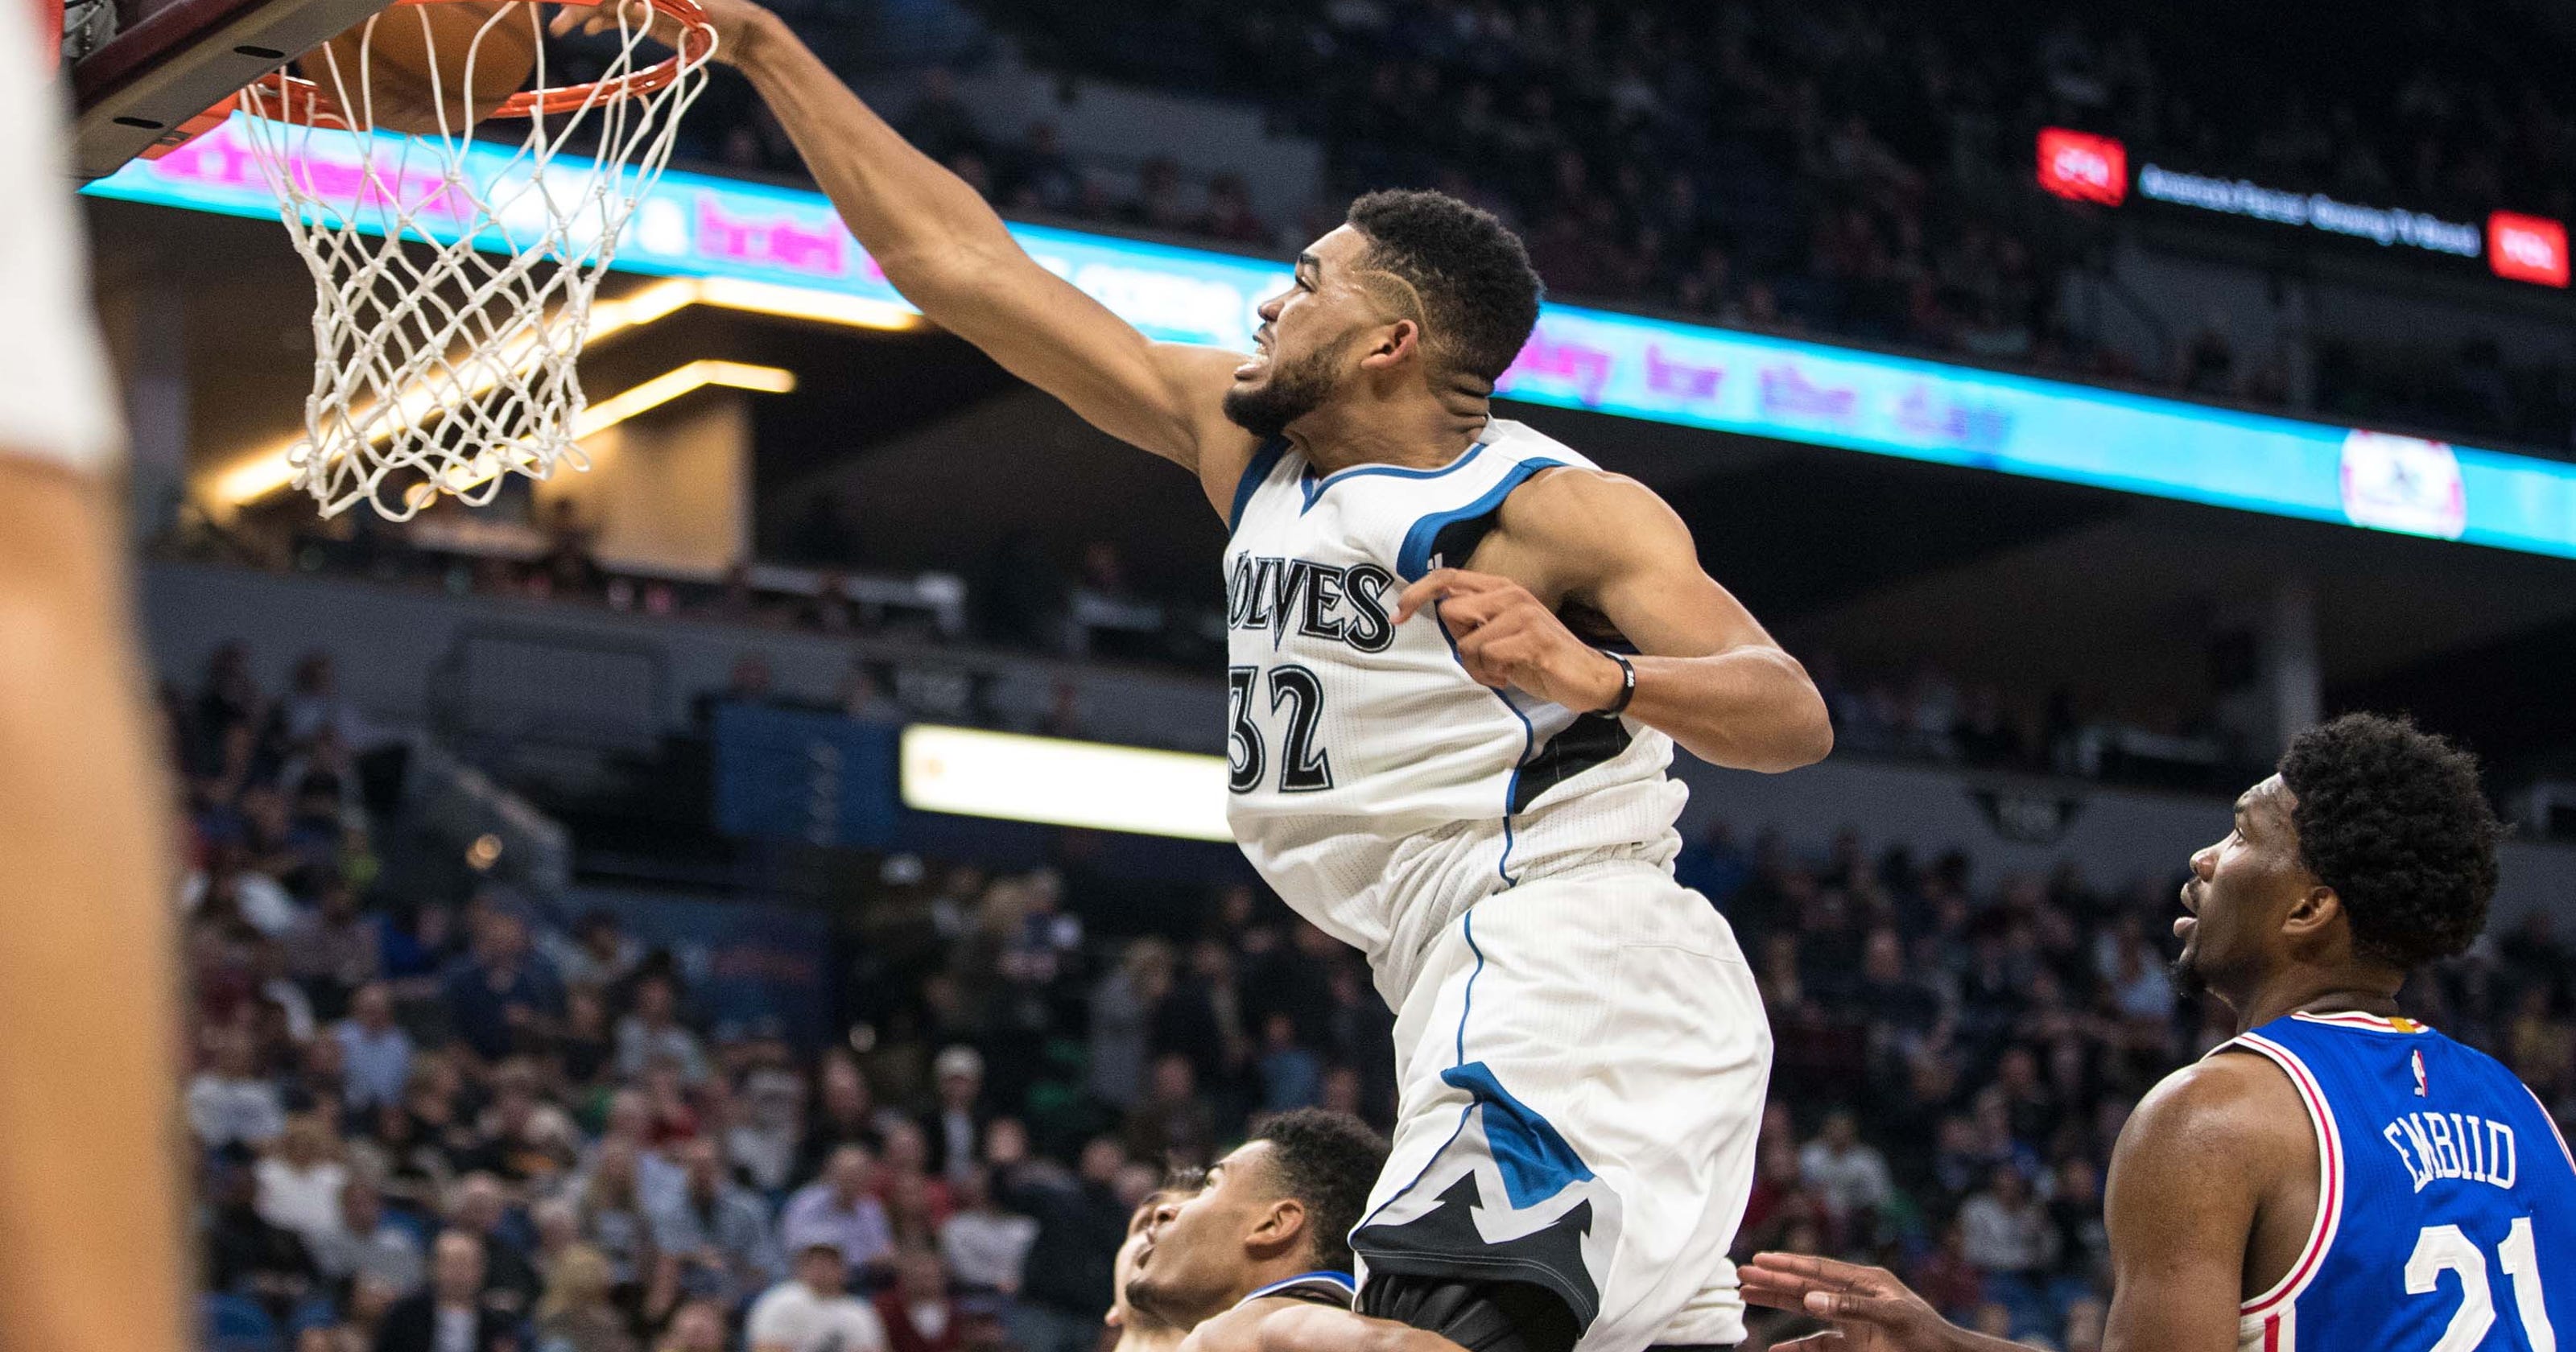 Karl-Anthony Towns throws down poster dunk3200 x 1680